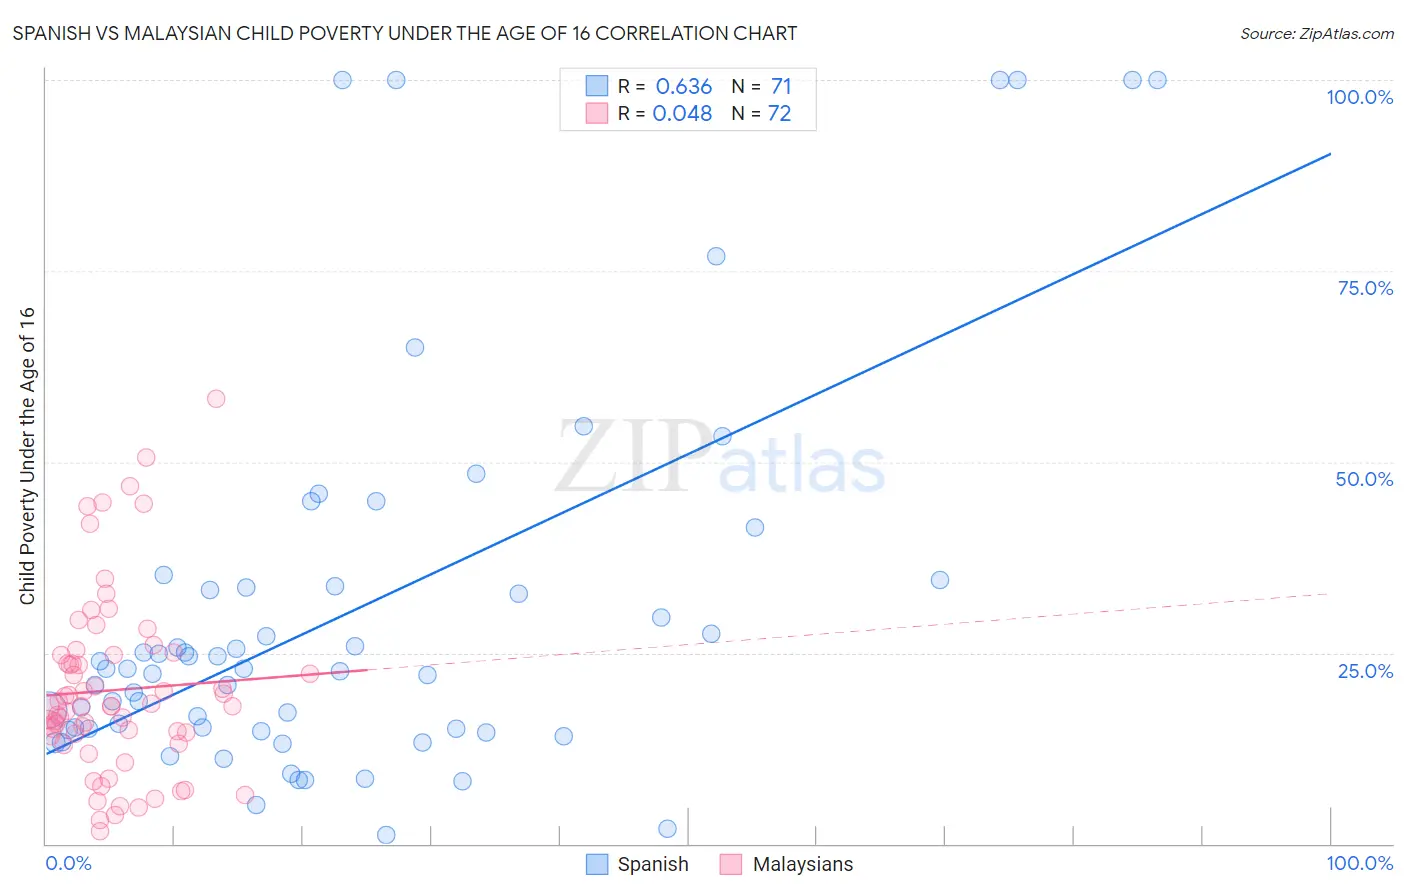 Spanish vs Malaysian Child Poverty Under the Age of 16